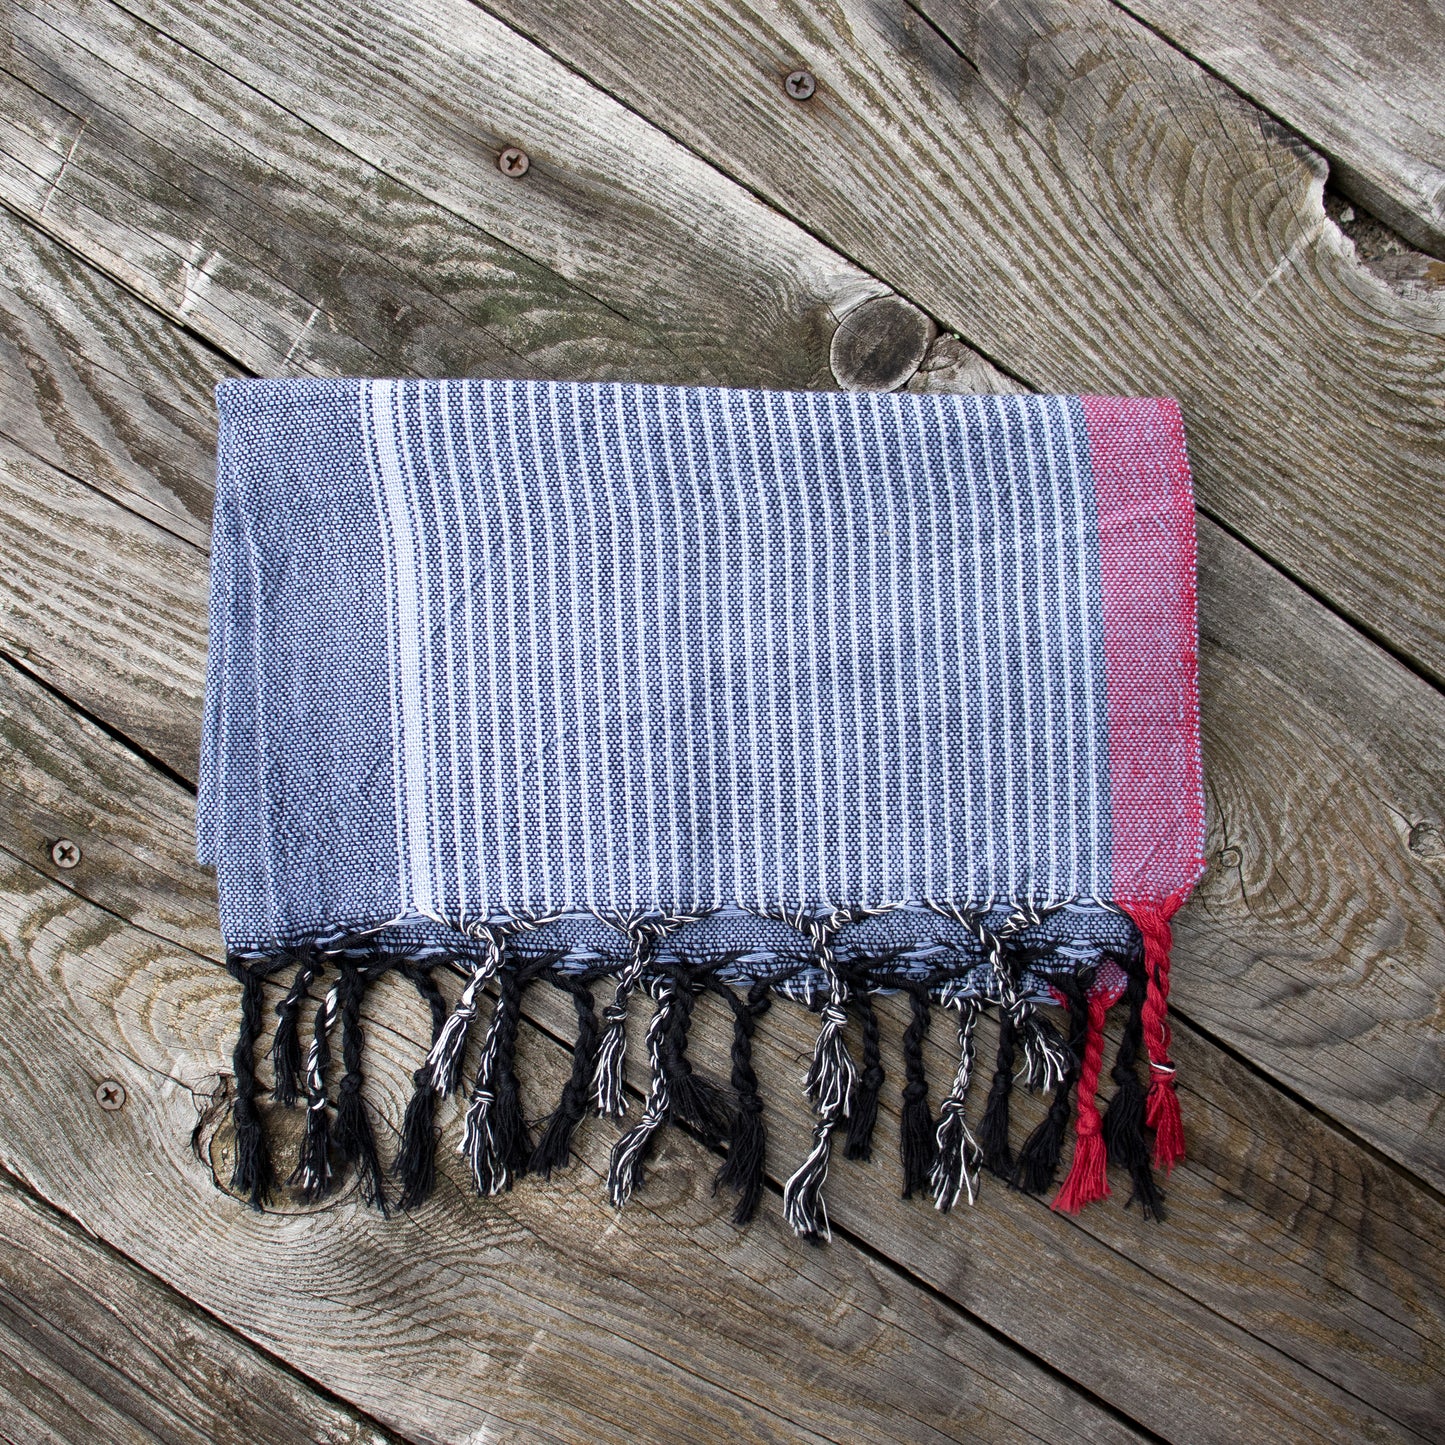 100% premium Turkish cotton hand towels—highly absorbent, lightweight, quick to dry, and perfect for the kitchen or bath. 17 x 25 inches overall hand-loomed and hand-dyed by Turkish artisans for woman-owned Home & Loft of New York.